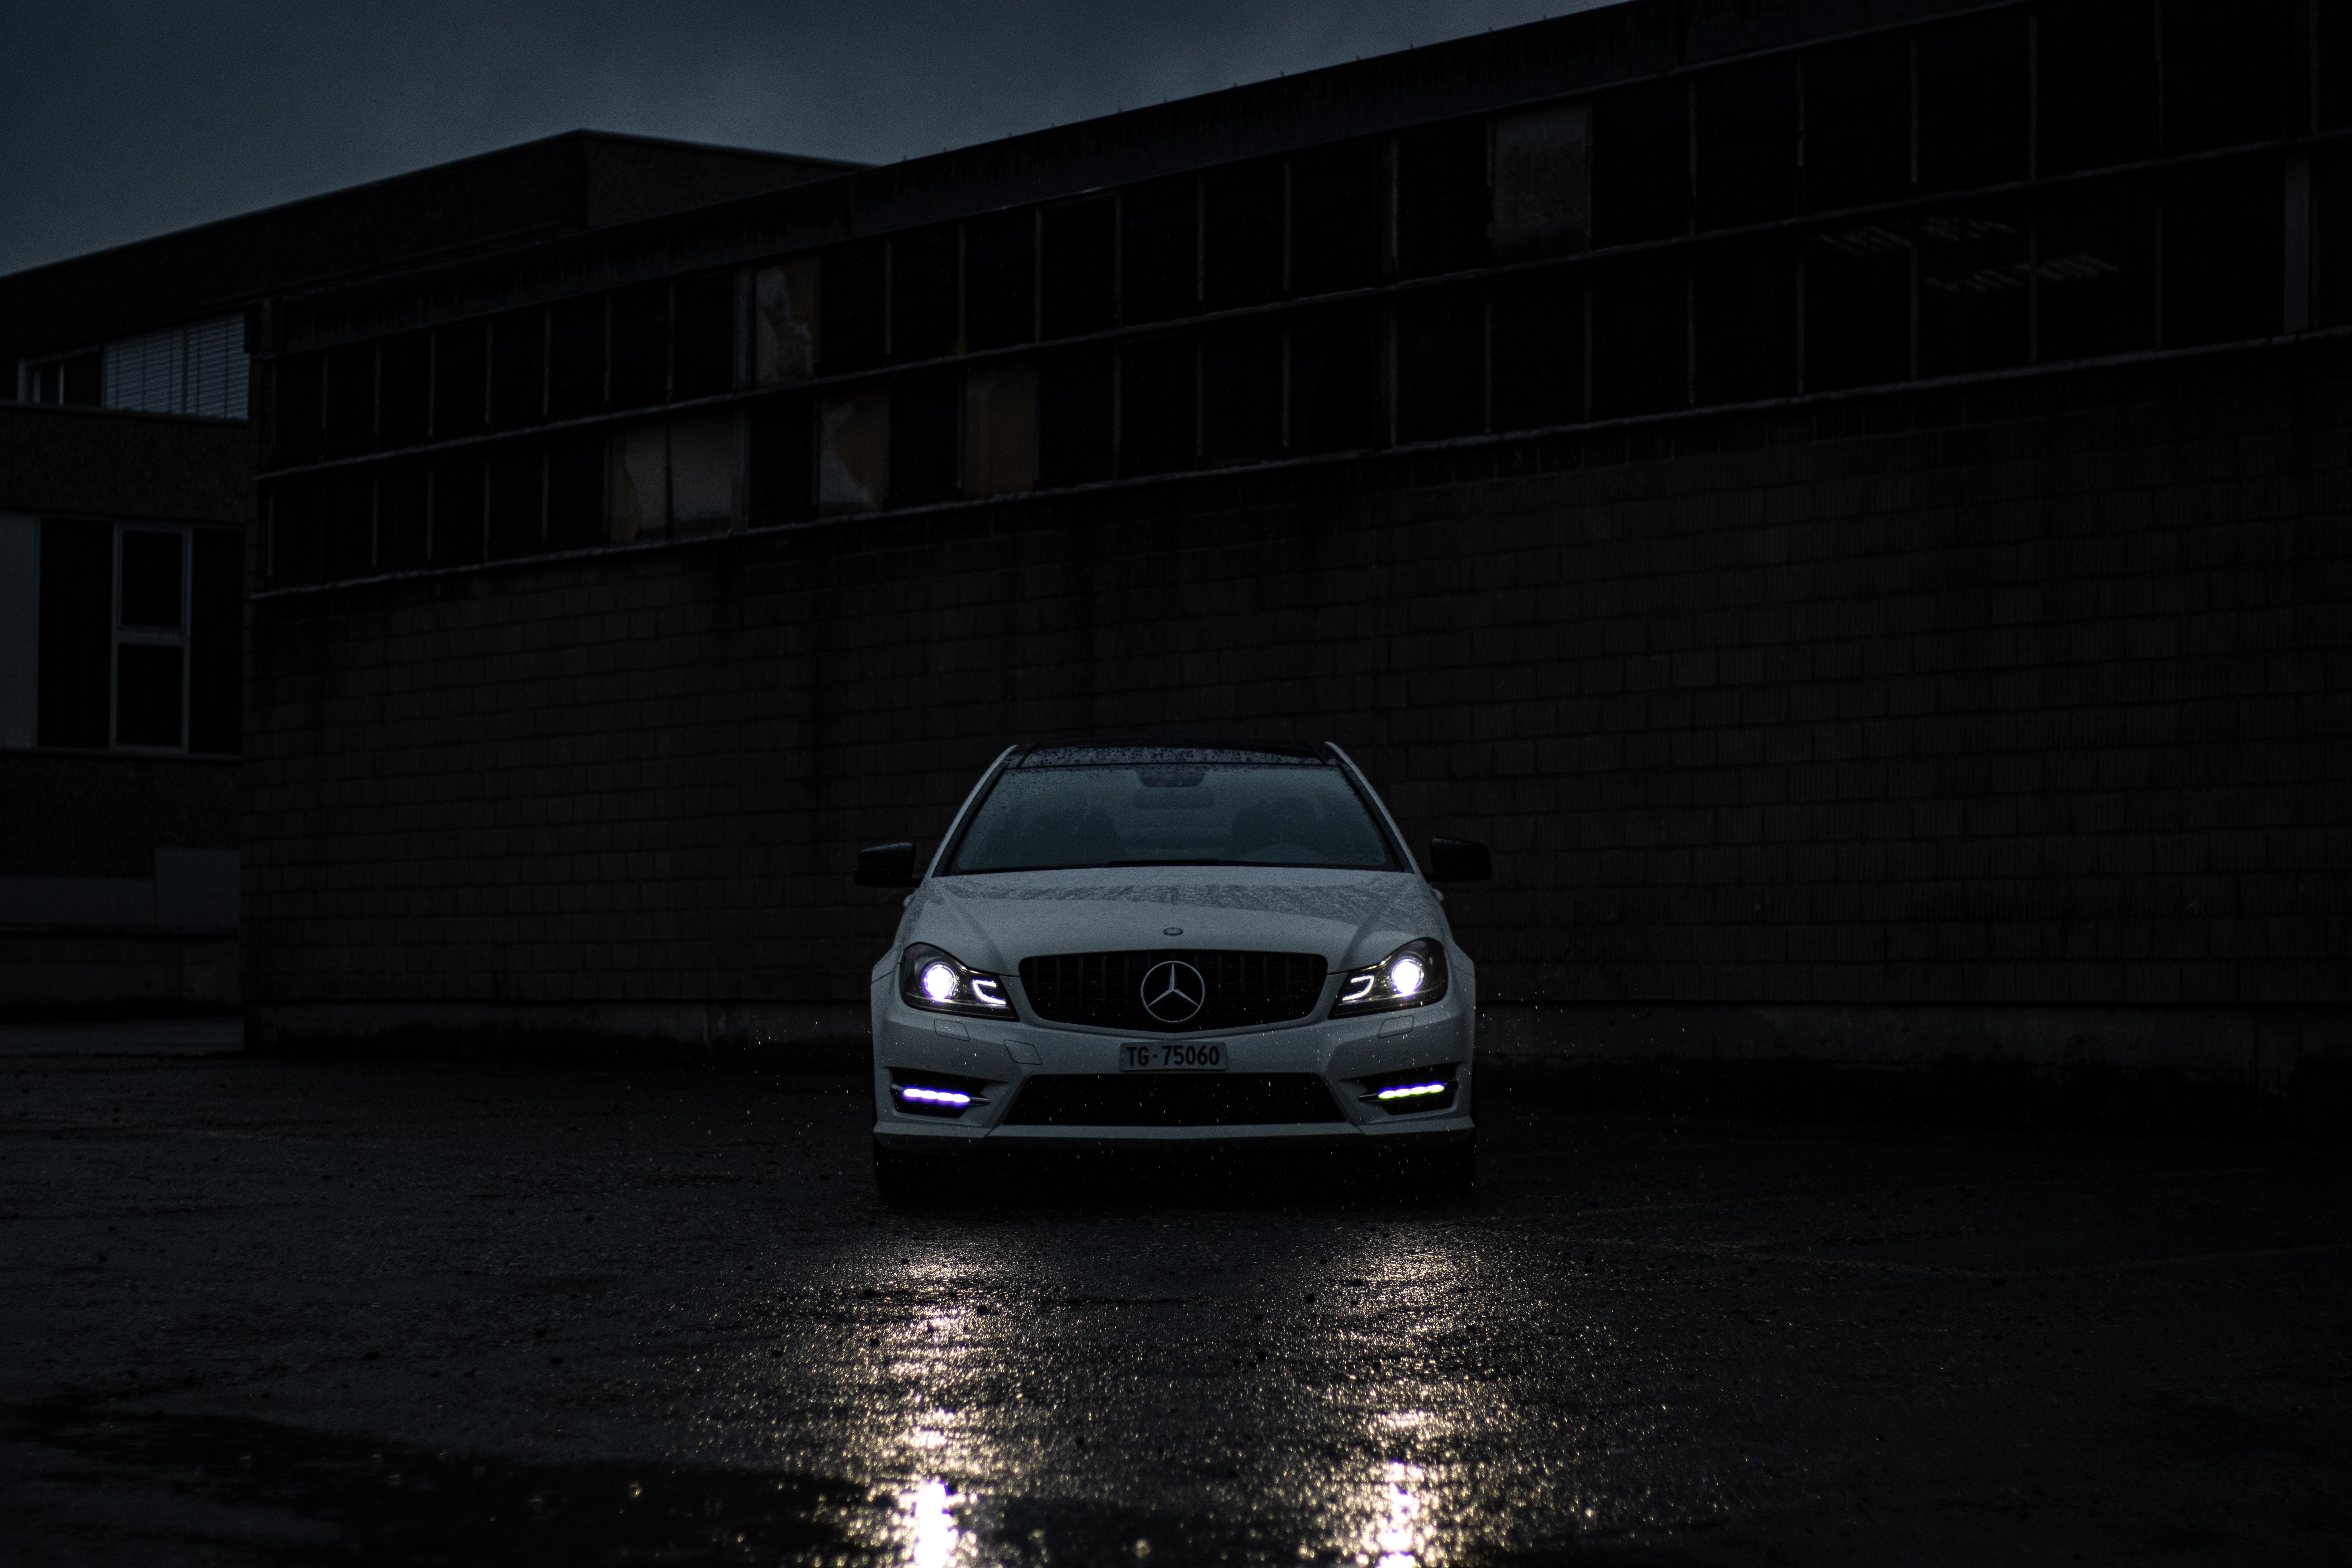 mercedes benz, headlights, front view, cars, white, lights, car